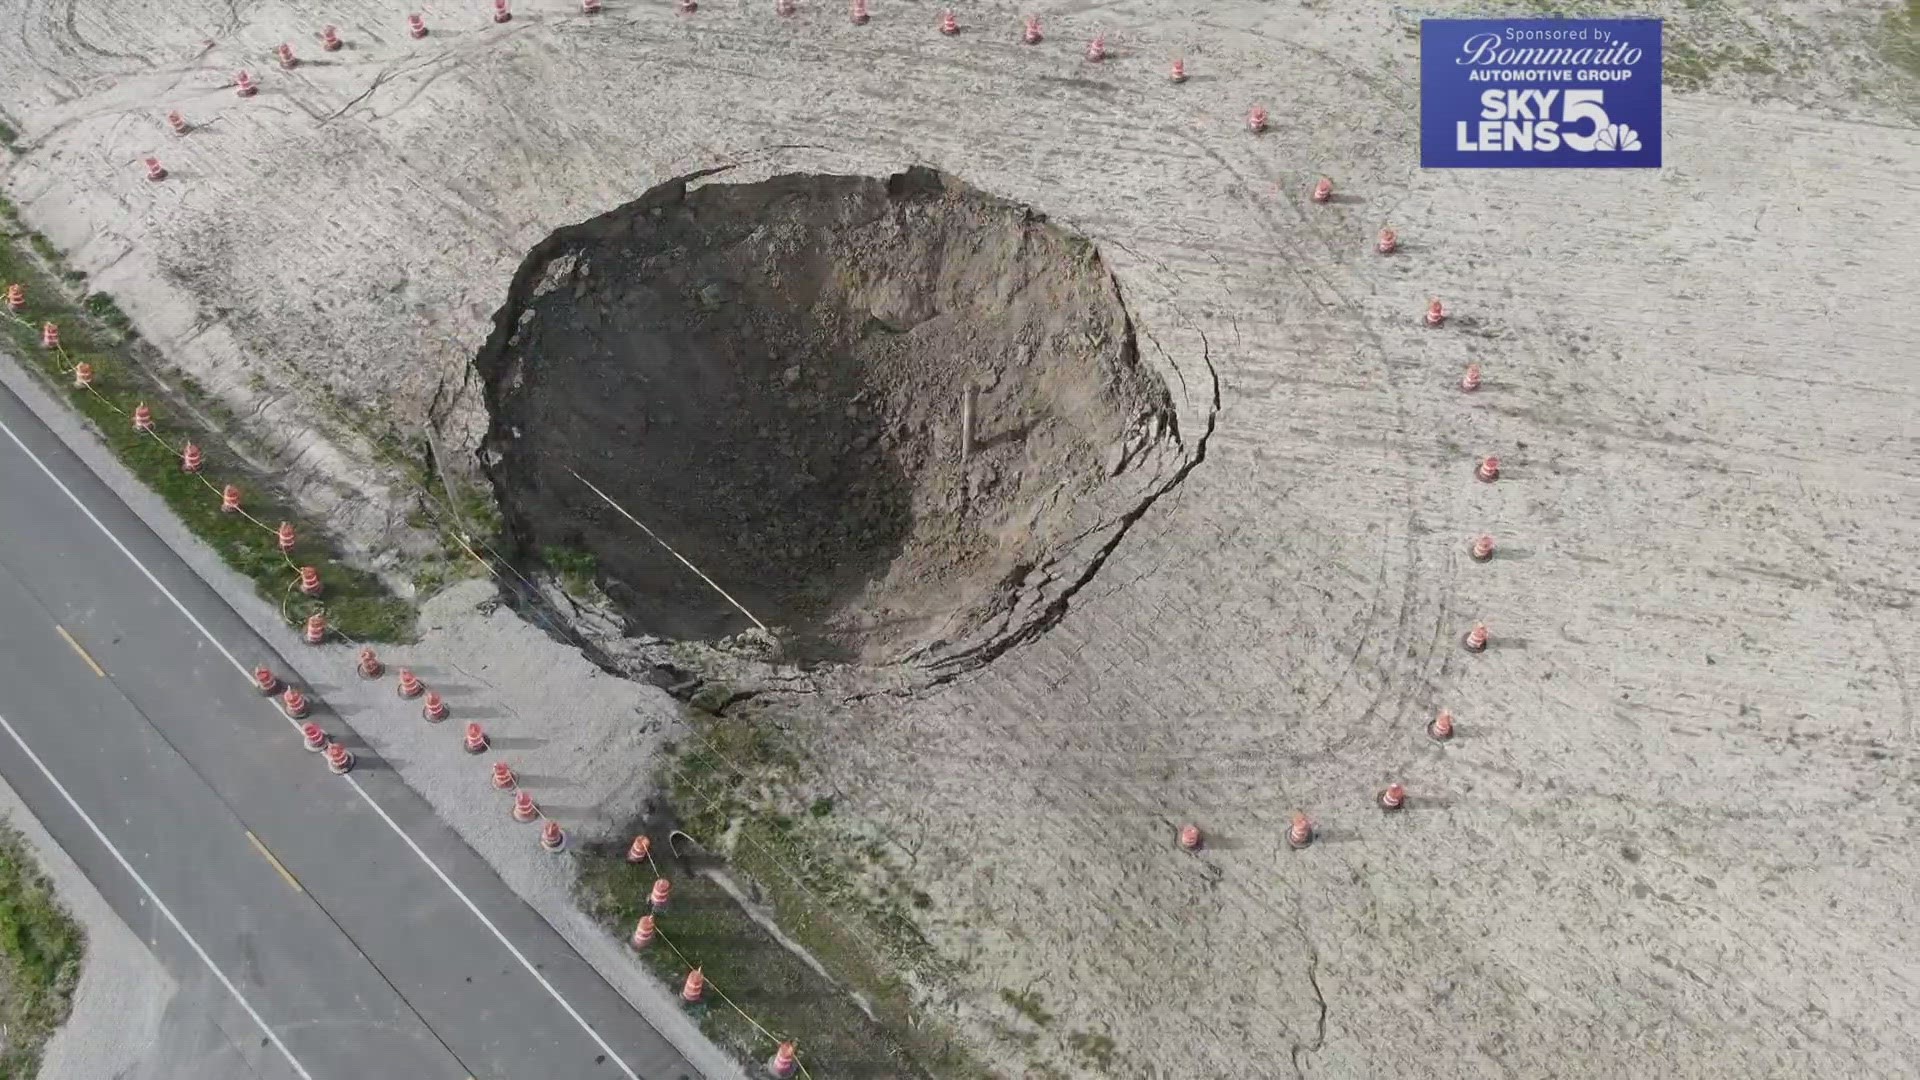 The sinkhole was first discovered on Thursday near Illinois Route 185 between Hillsboro and Coffeen, Illinois. The sinkhole has grown.